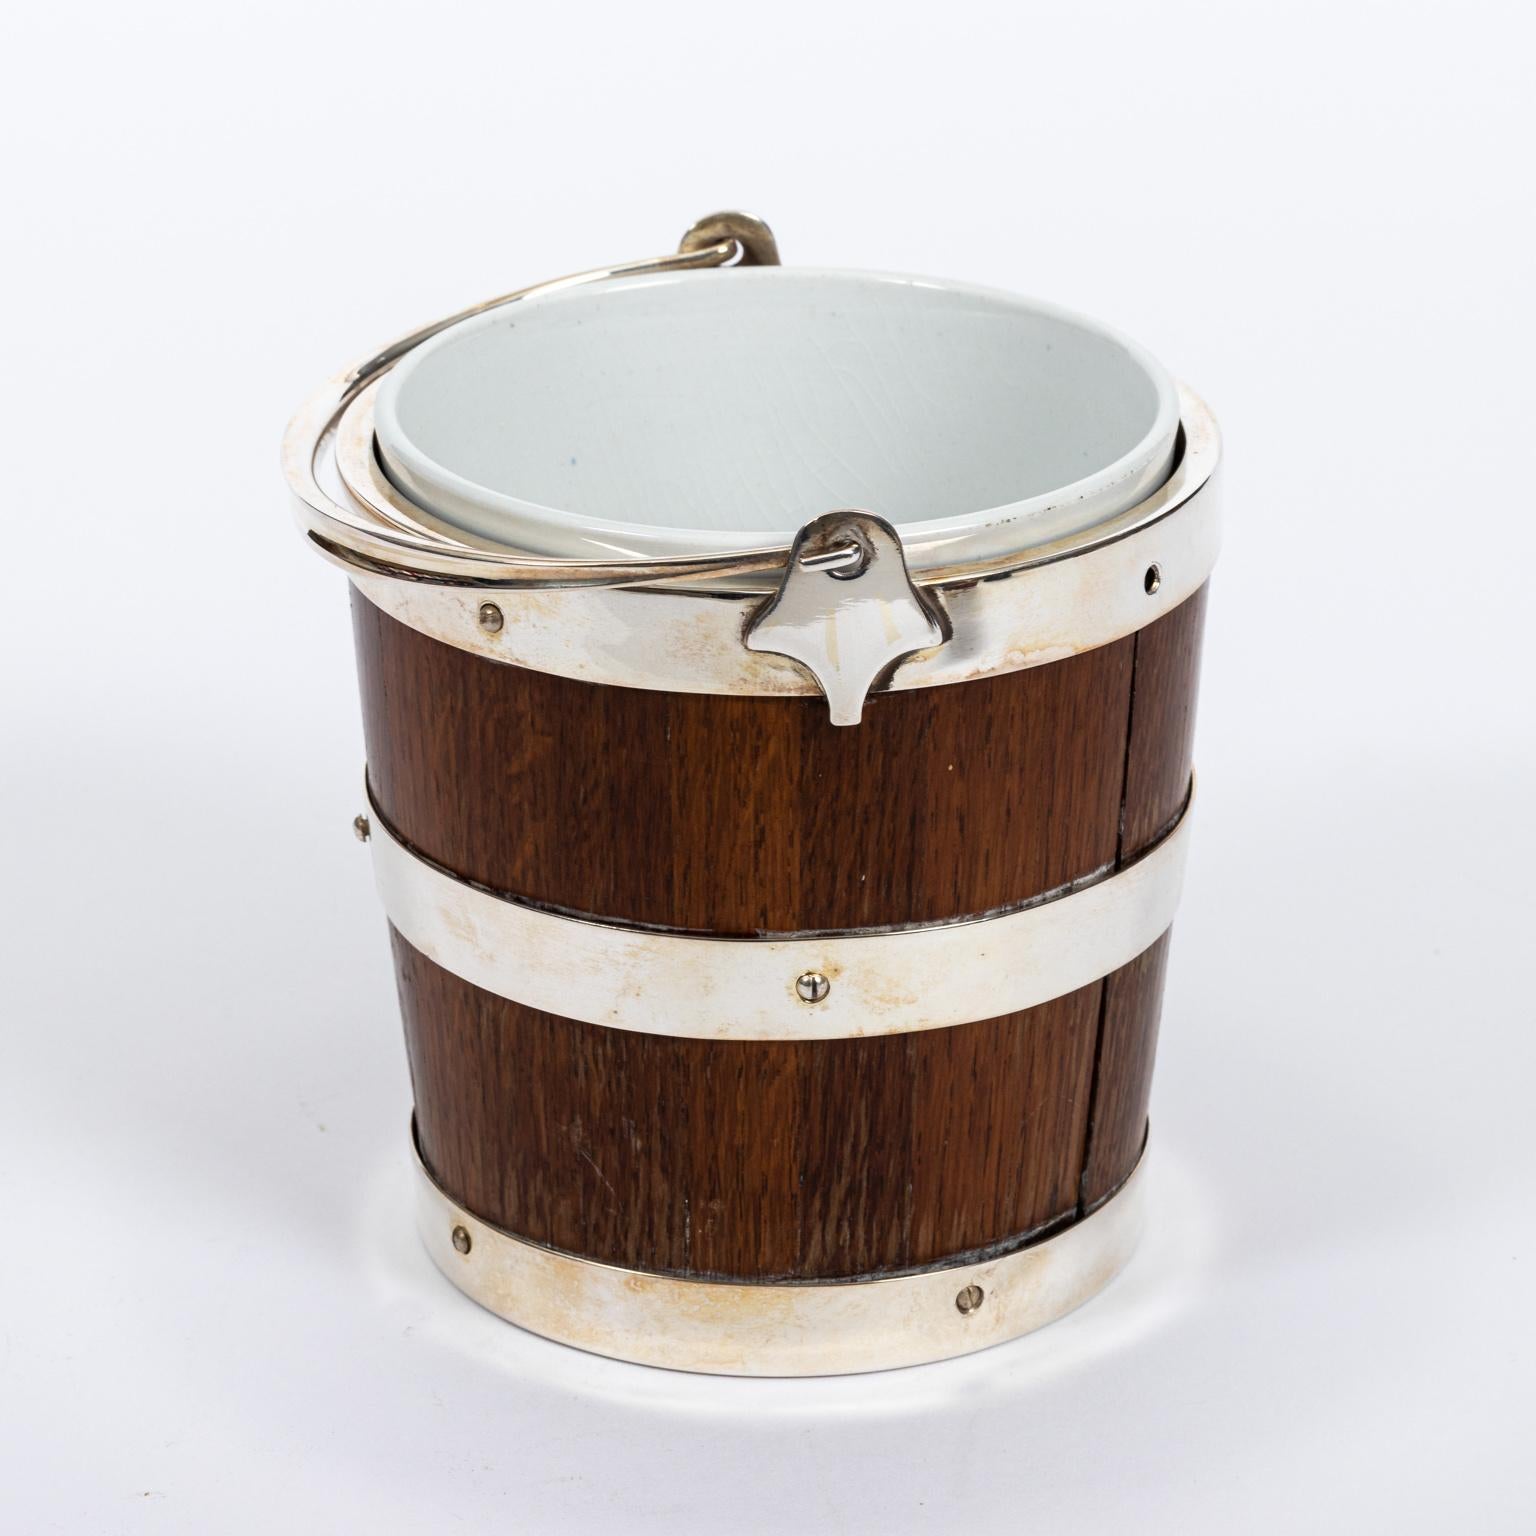 Oak and silver plate ice pail with liner, circa 1930s. The bottom of the inside of the pail features a removal silver plate flower motif panel. Please note of wear consistent with age including minor finish loss to the wood and liner.